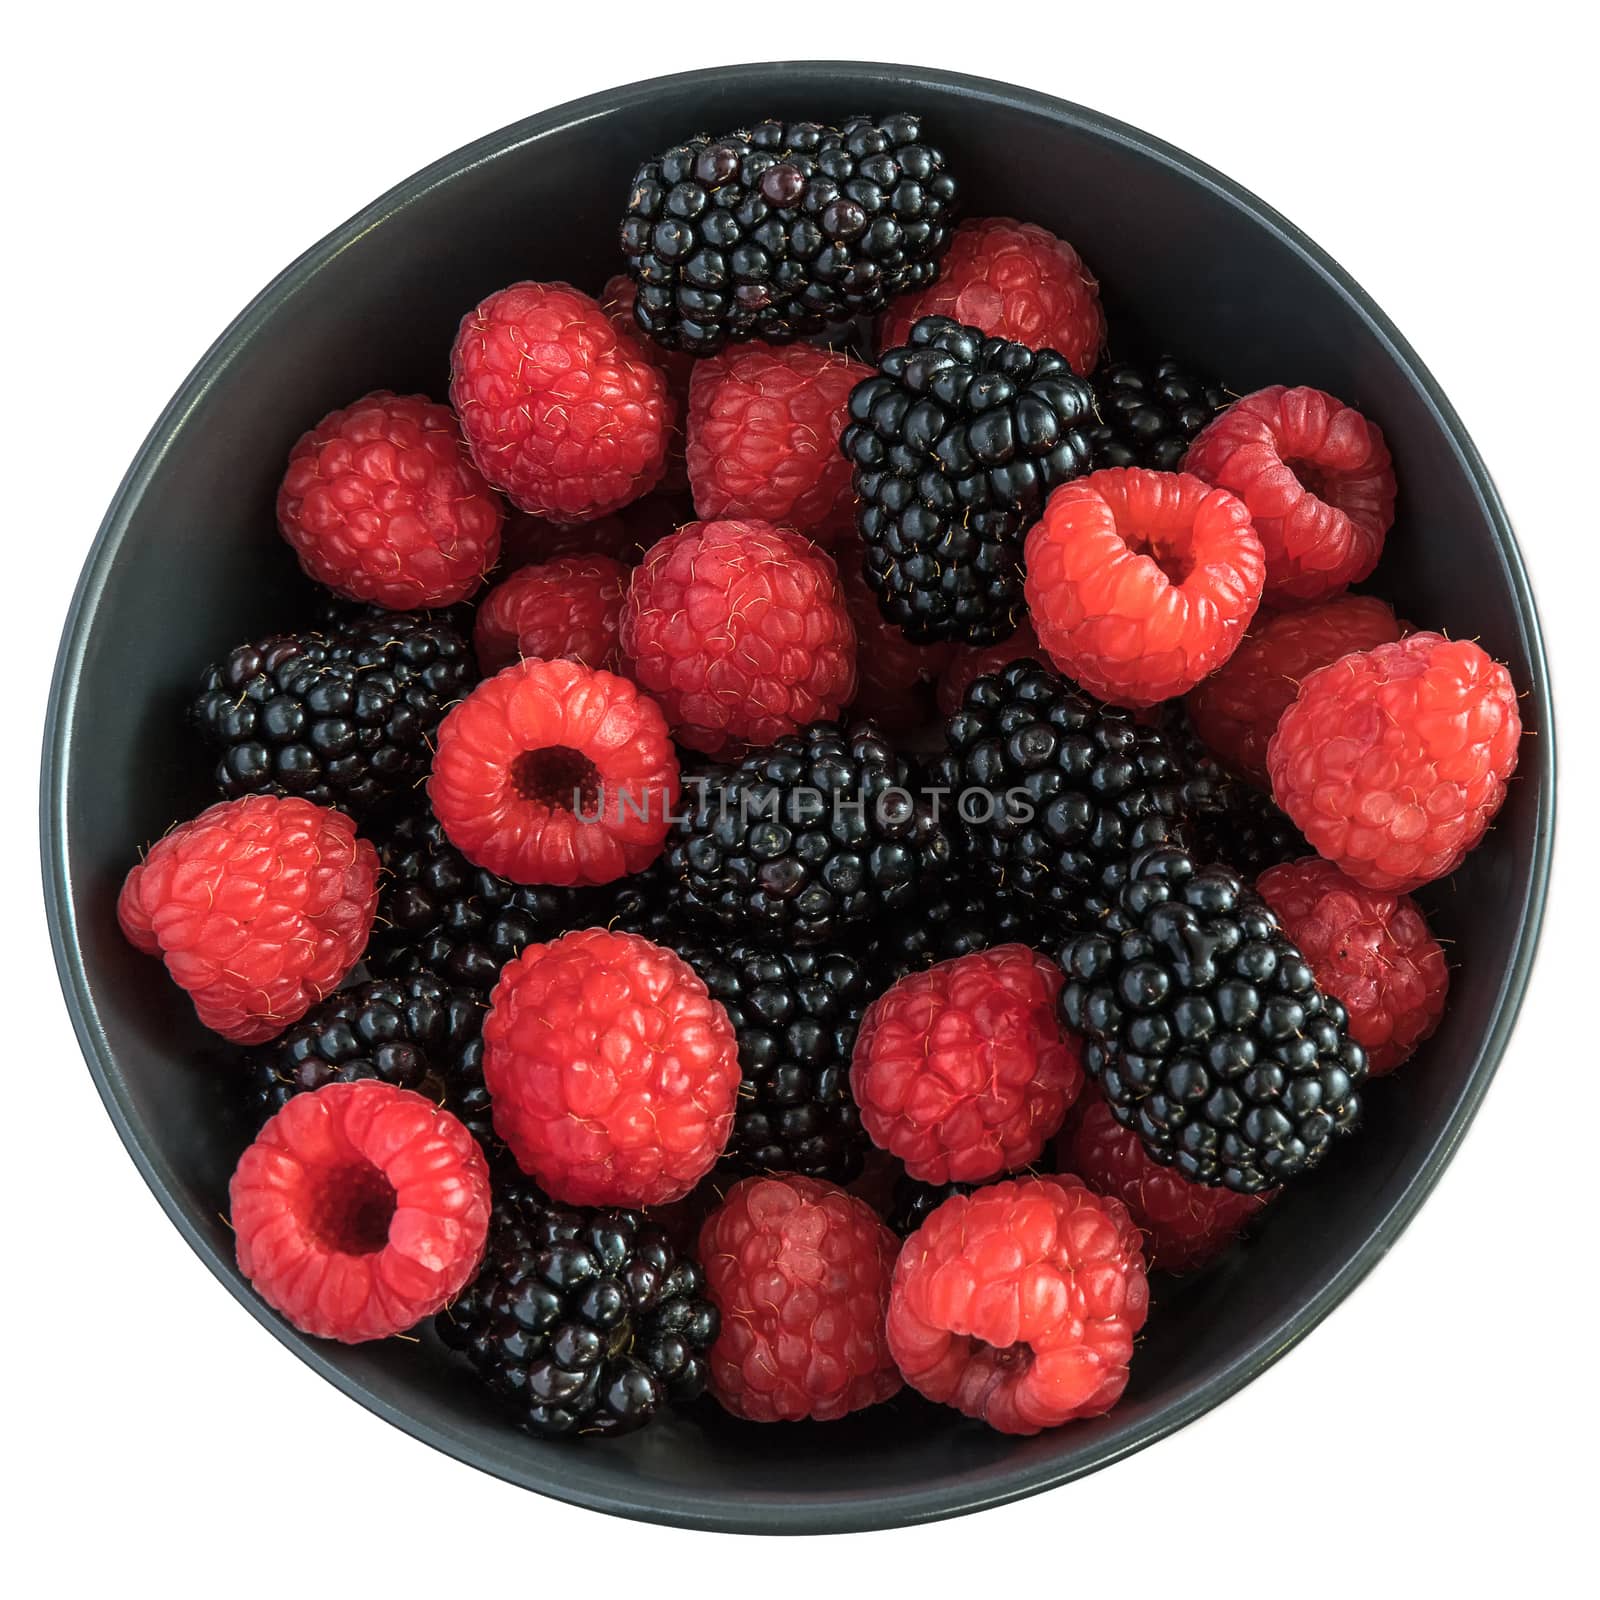 Blackberries and raspberries in a black bowl. White background. Top view.